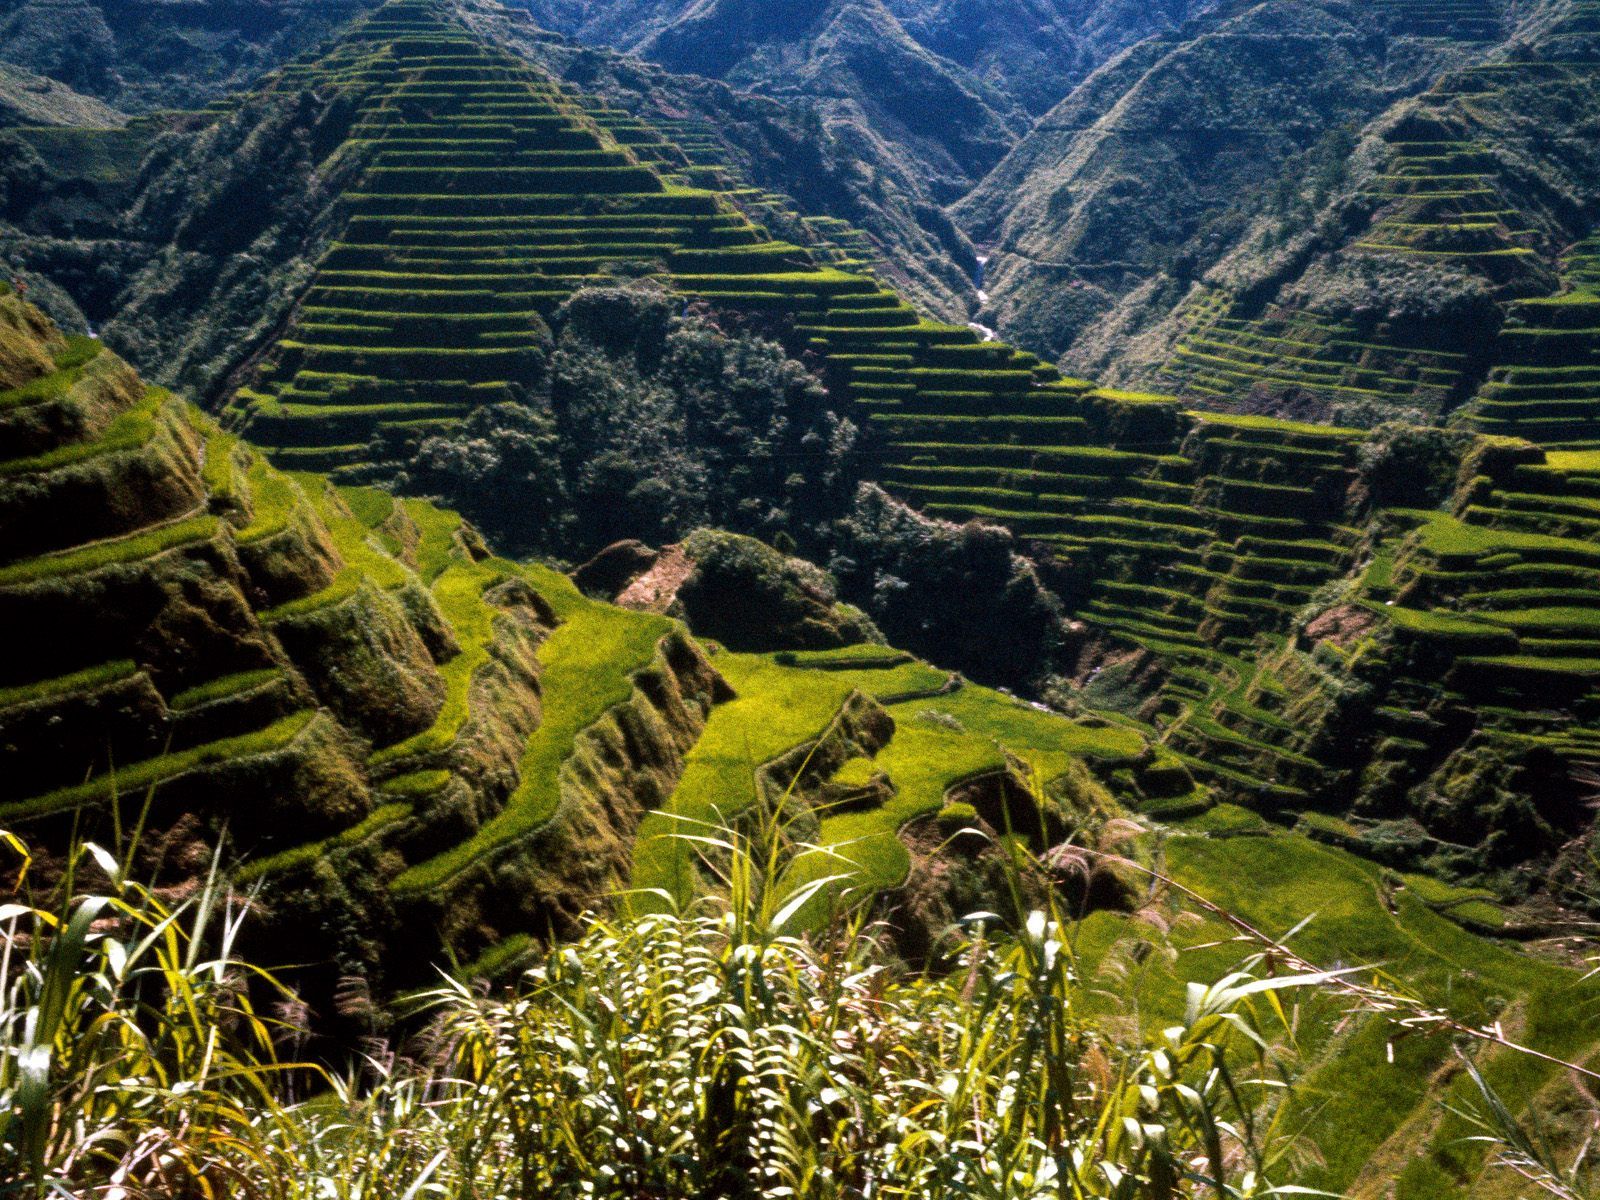 Ancient Rice Terraces / Philippines wallpapers and images ...